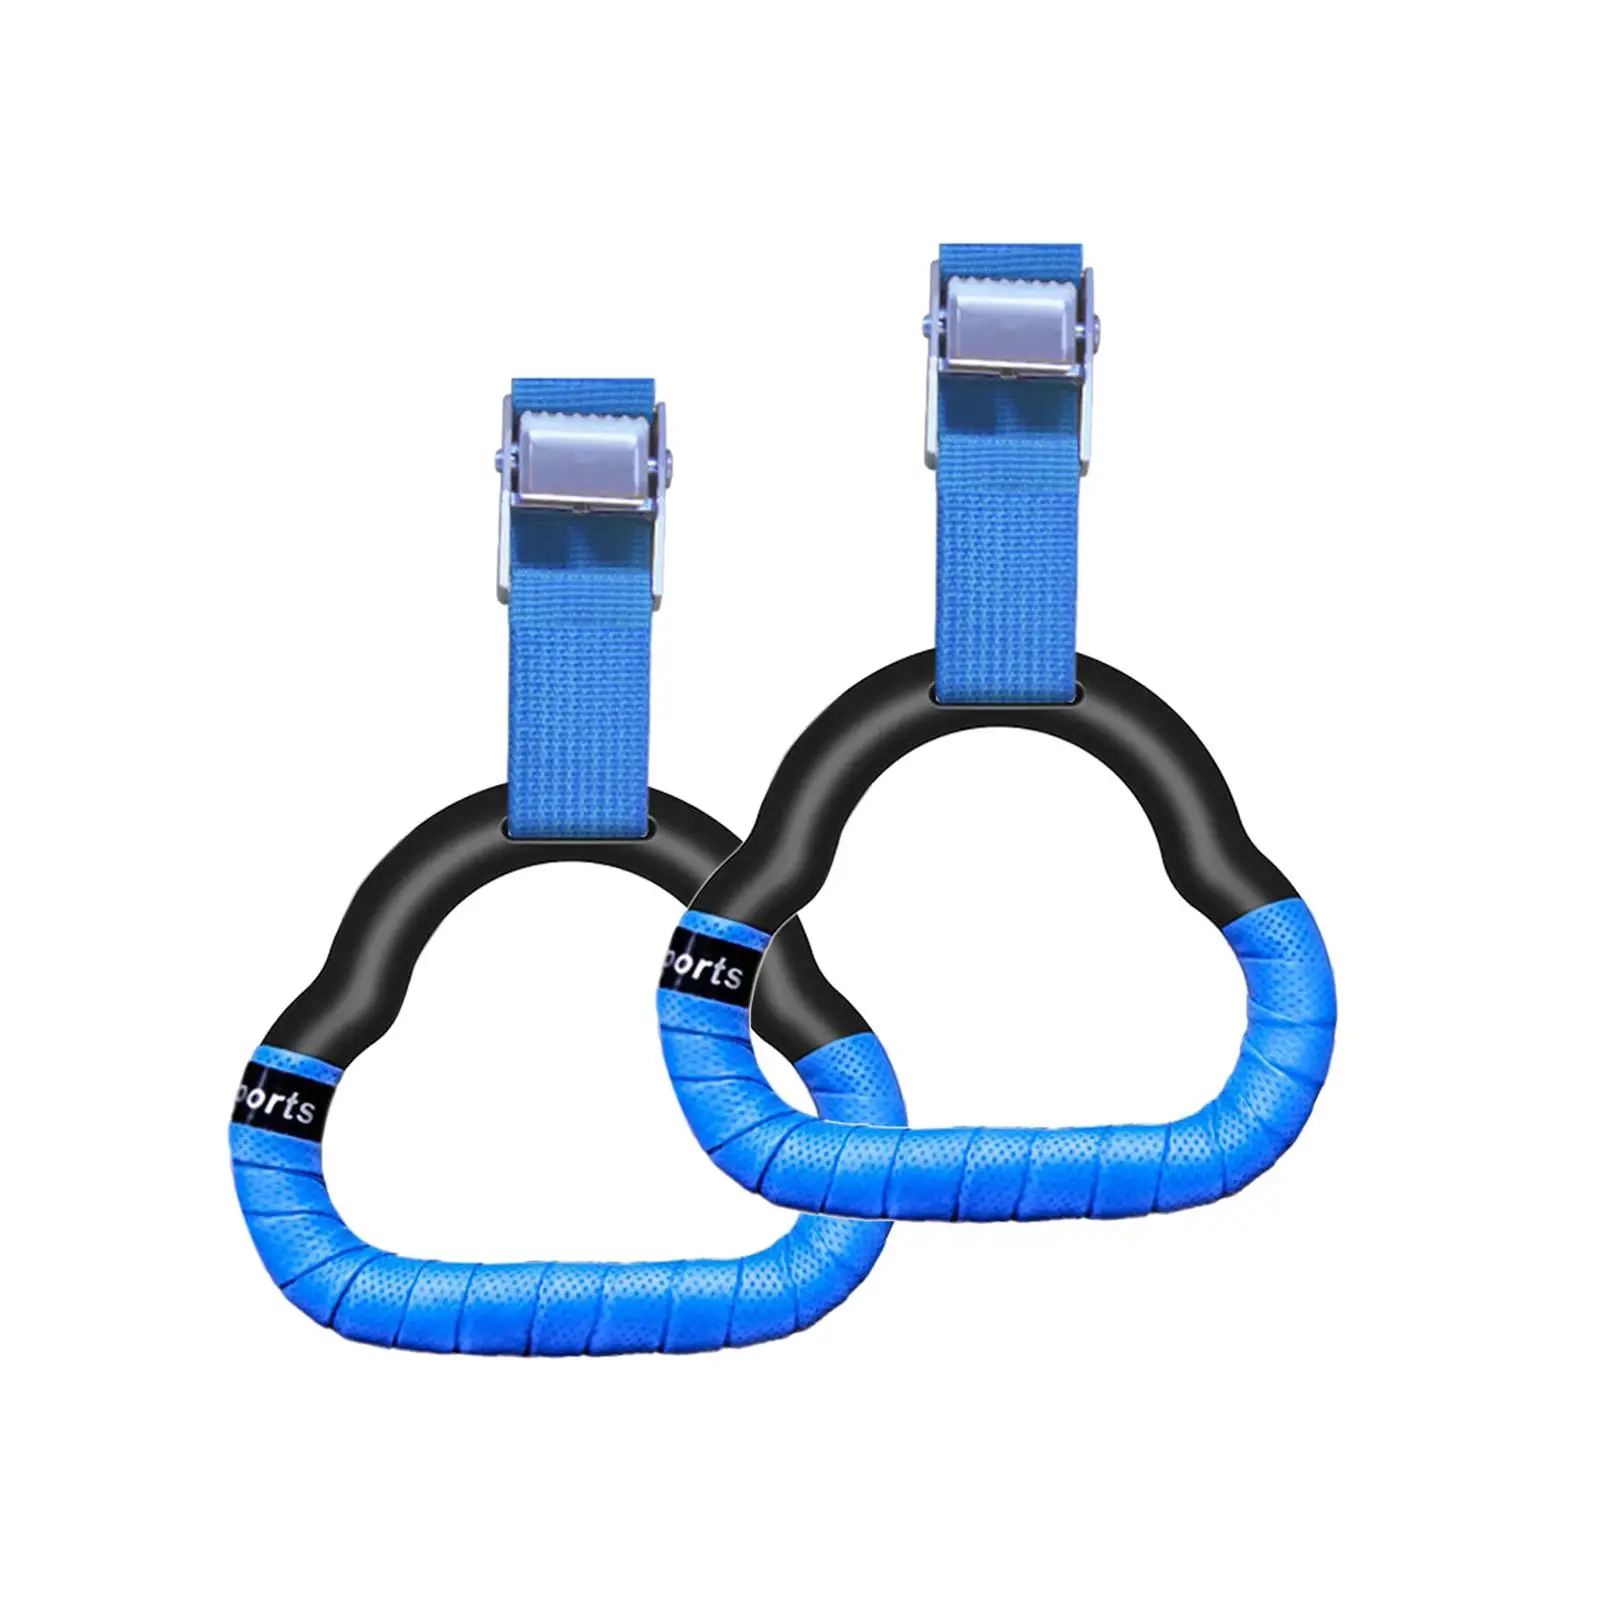 Gymnastics Rings Non Slip Children Adjustable Straps Buckles Gym Ring Exercise Rings Strength Training for Workout Home Gym